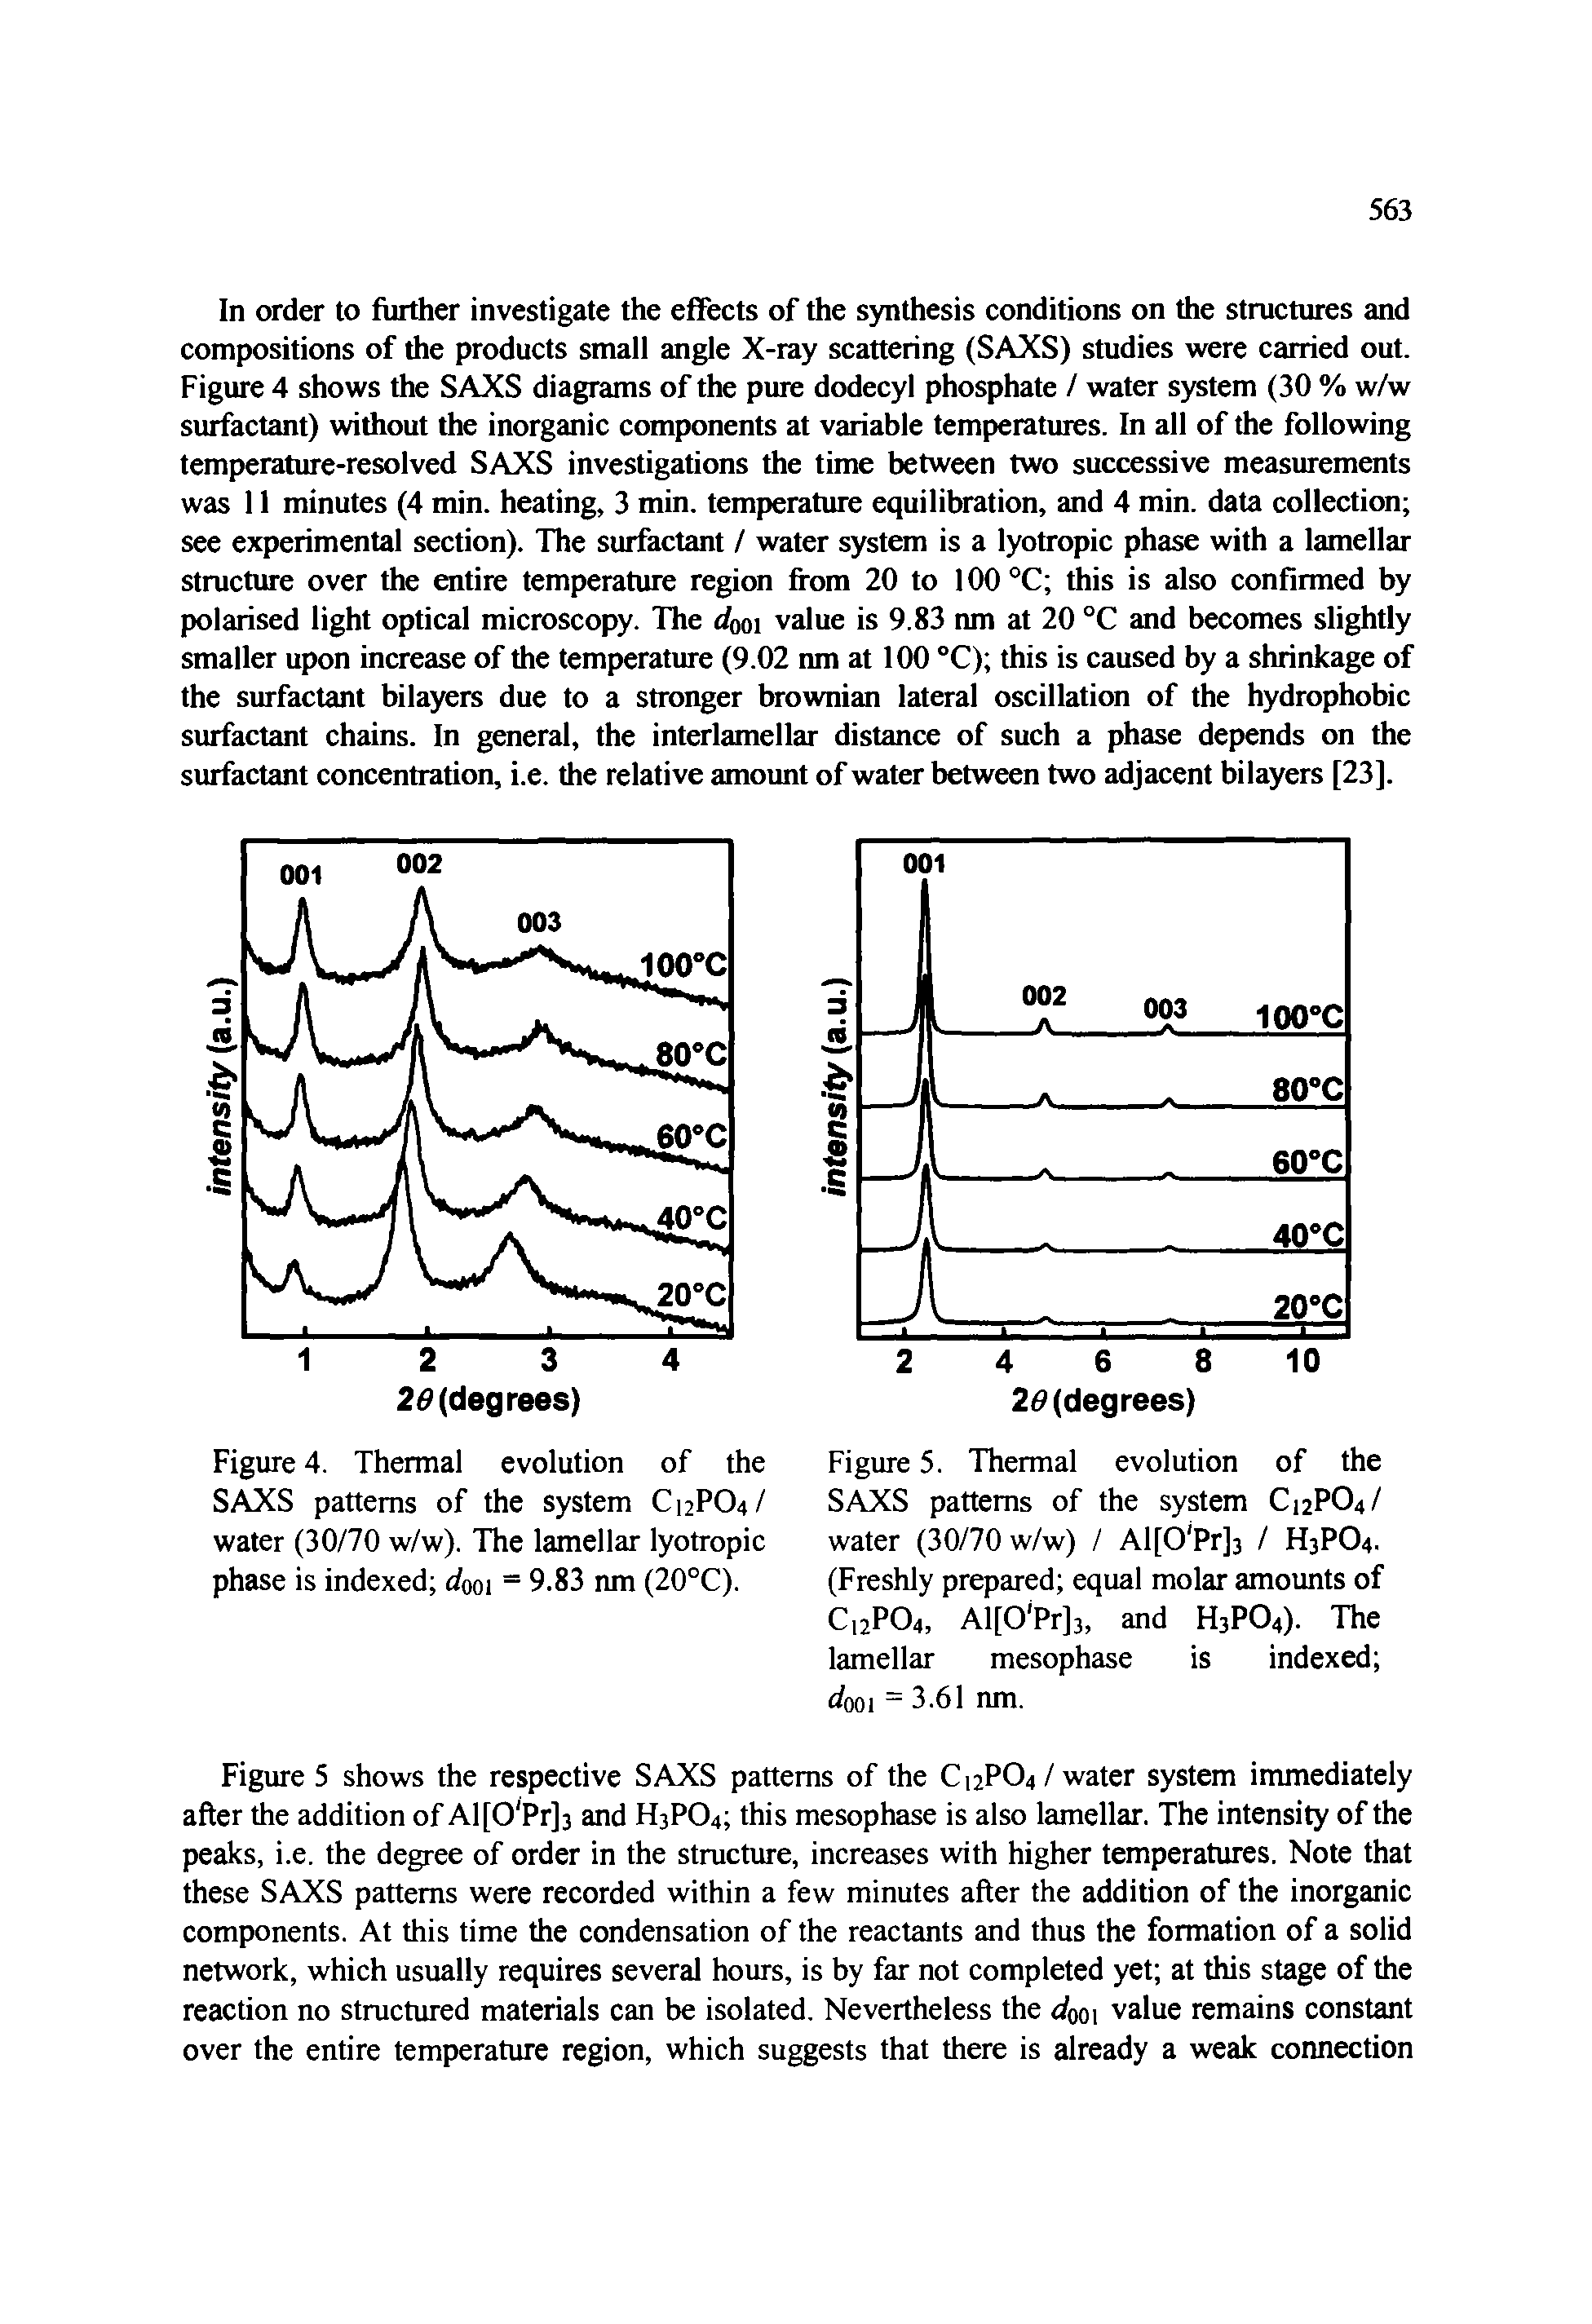 Figure 4. Thermal evolution of the SAXS patterns of the system C12PO4/ water (30/70 w/w). The lamellar lyotropic phase is indexed doot - 9.83 nm (20°C).